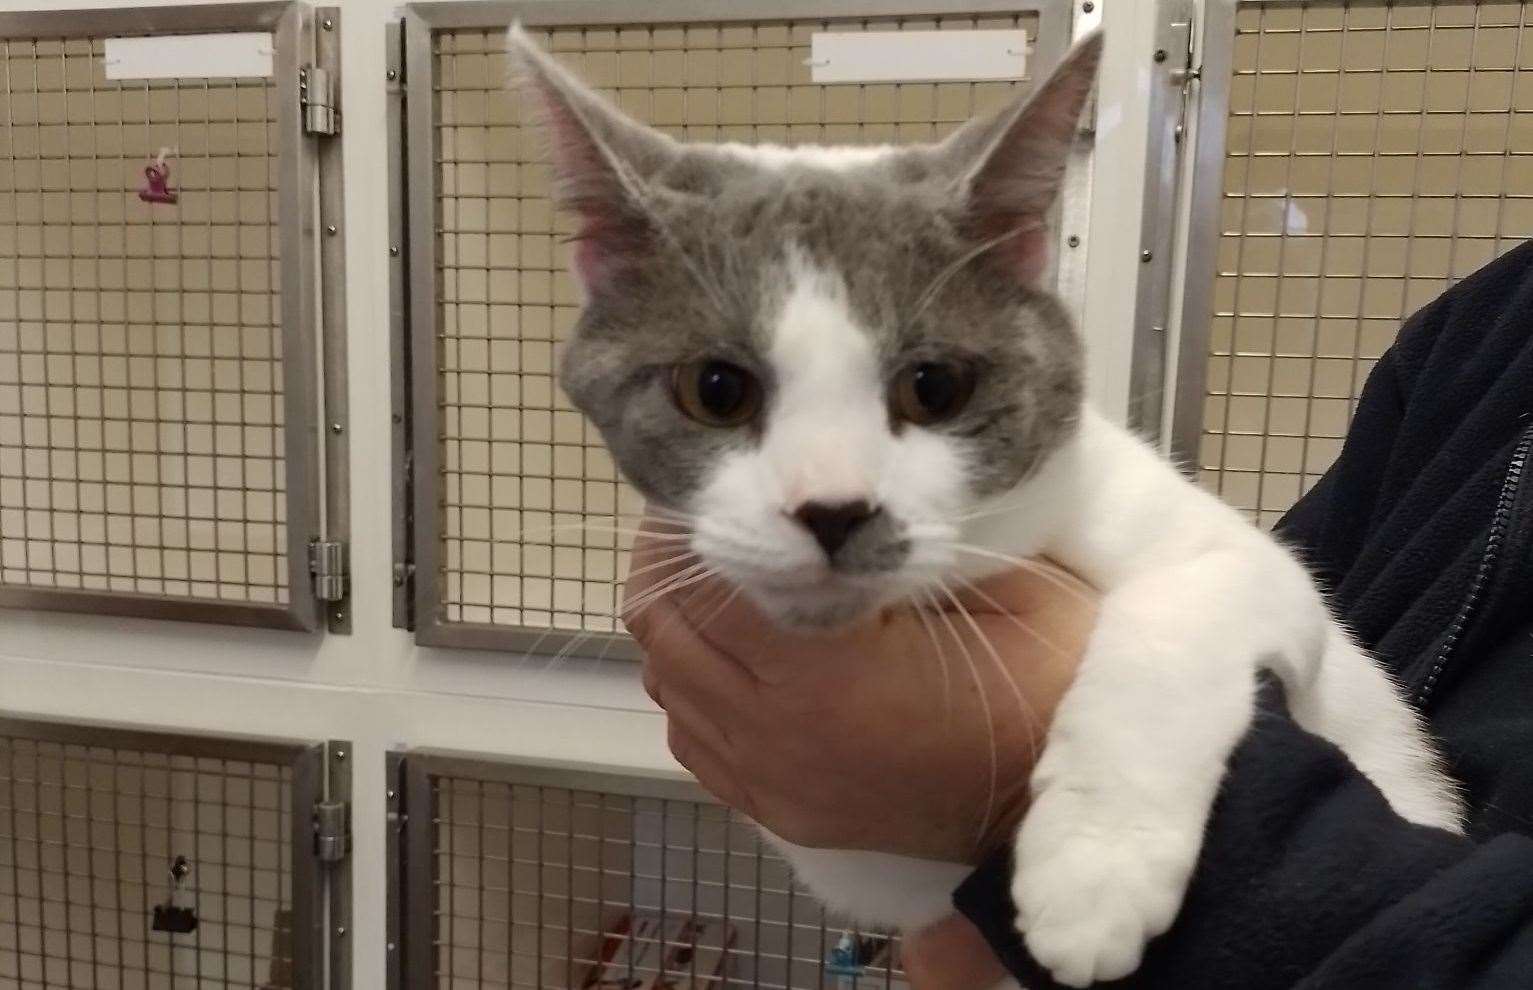 The cat was found taped into a food bin with no air. Picture: RSPCA